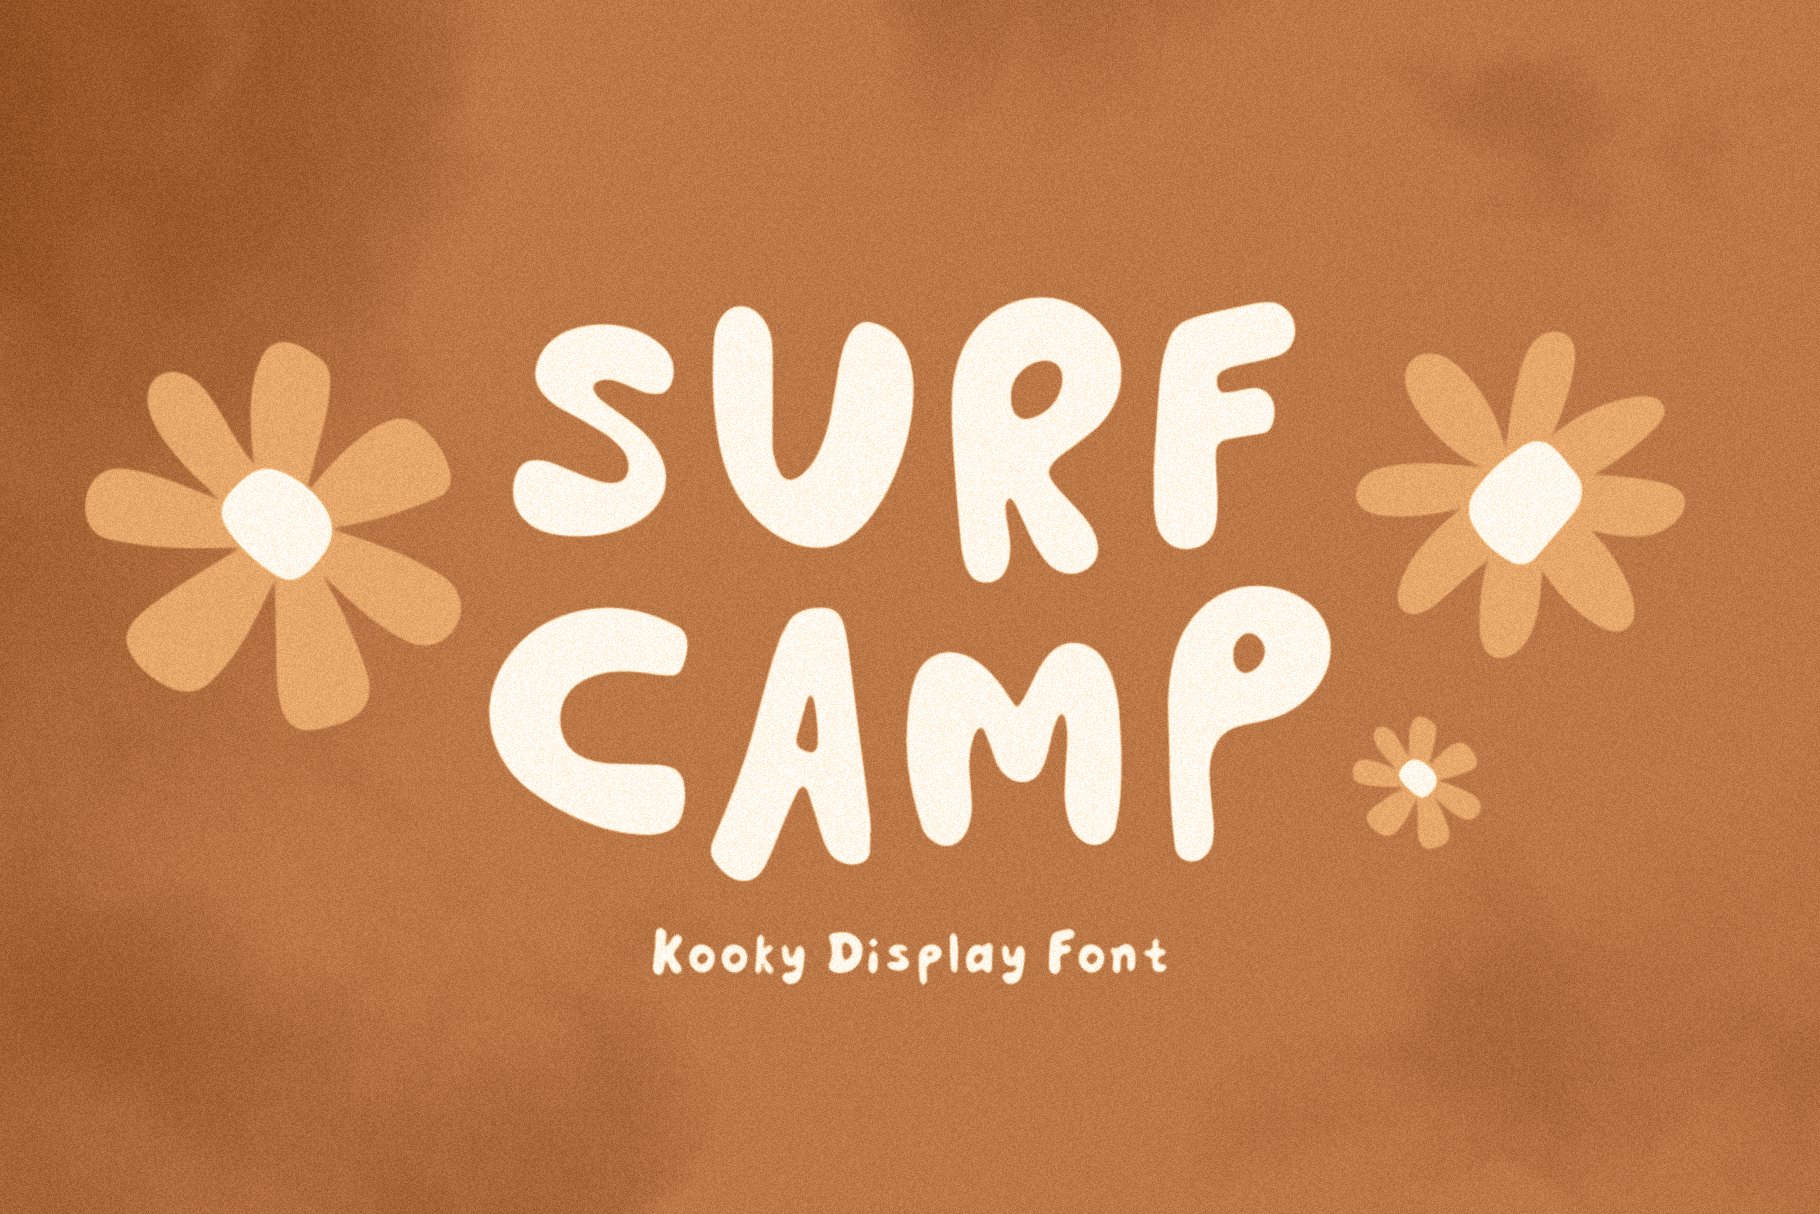 Surf Camp cover image.